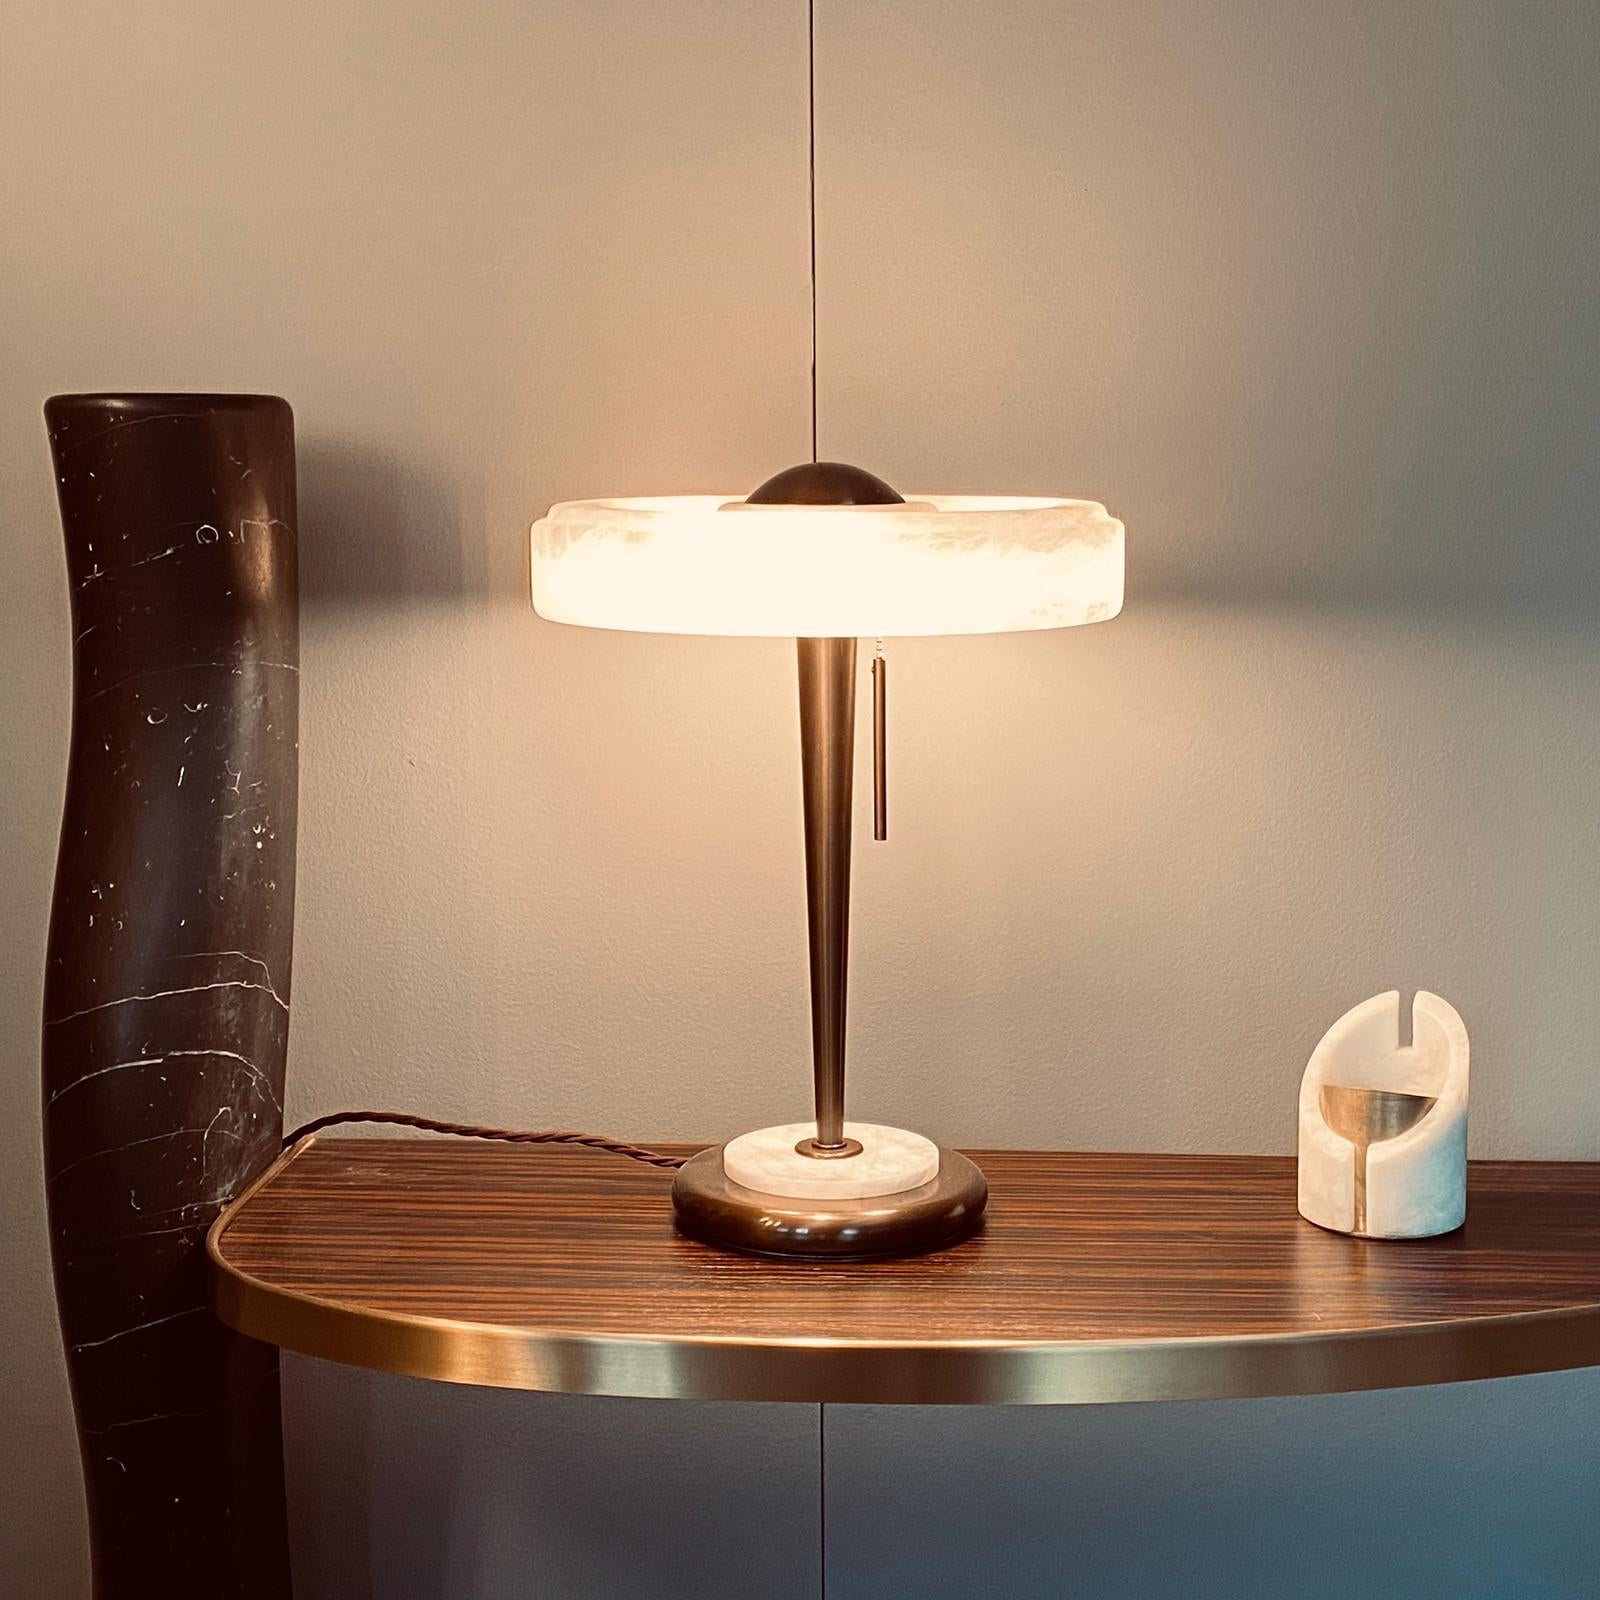 Cosulich Interiors in collaboration with Matlight: An Art Deco style organic table or desk lamp with a retro aesthetic, handcrafted in limited series of 10 pieces in Italy.
The aerodynamic flat design shade, raised on an elegant bronze finish